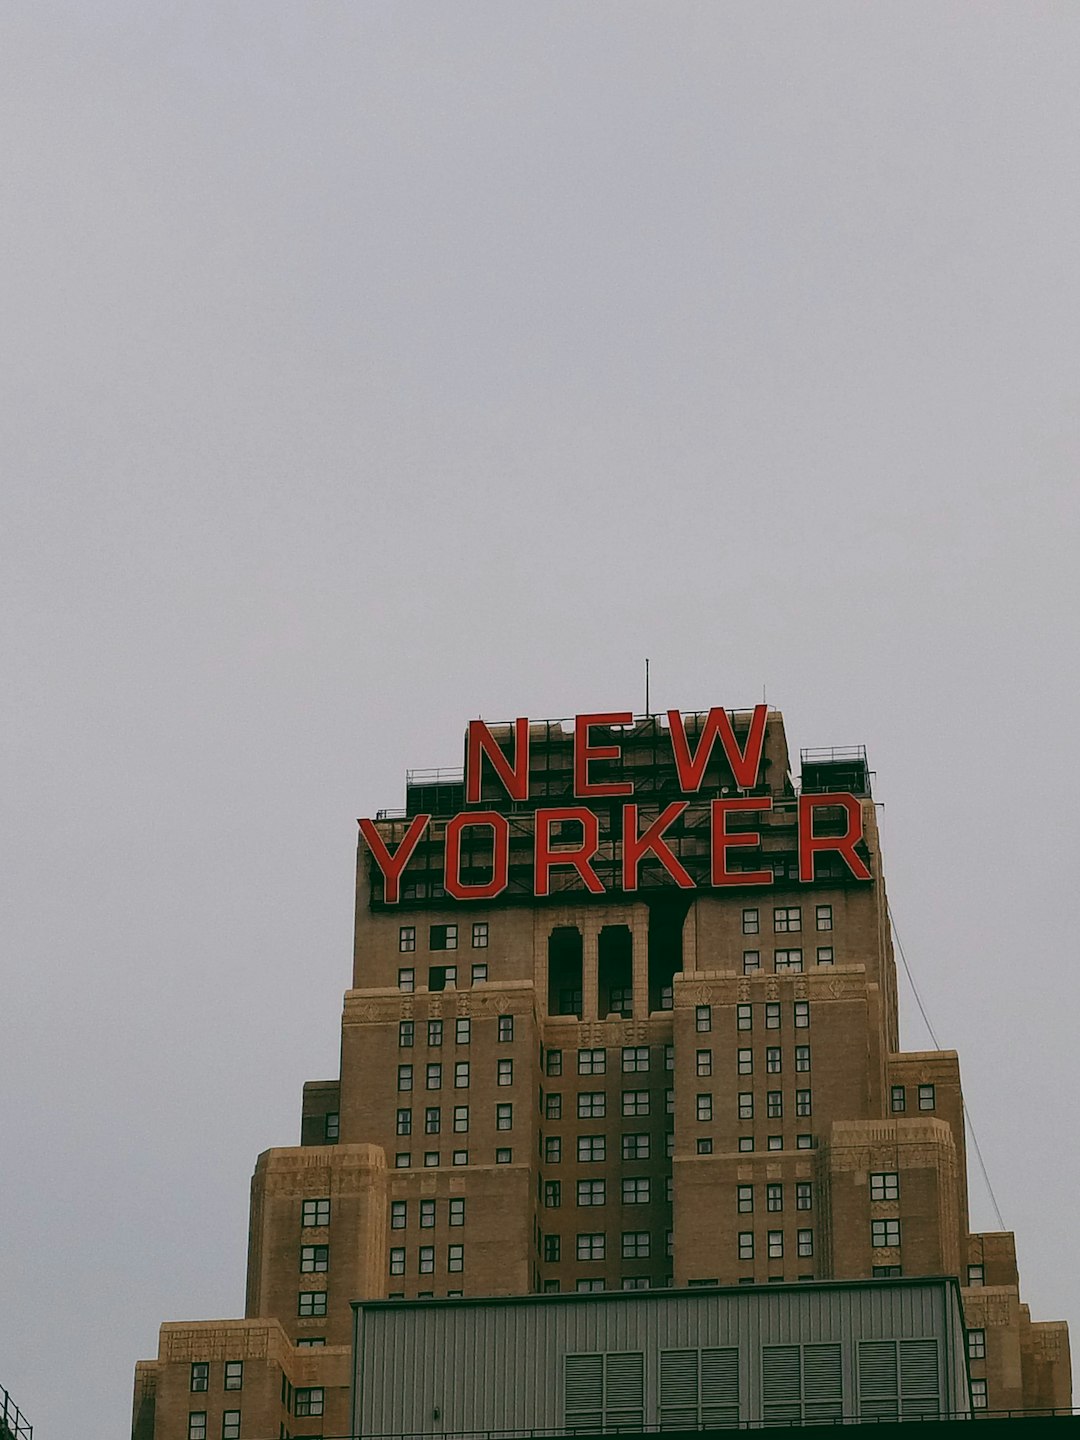 New Yorker building during daytime